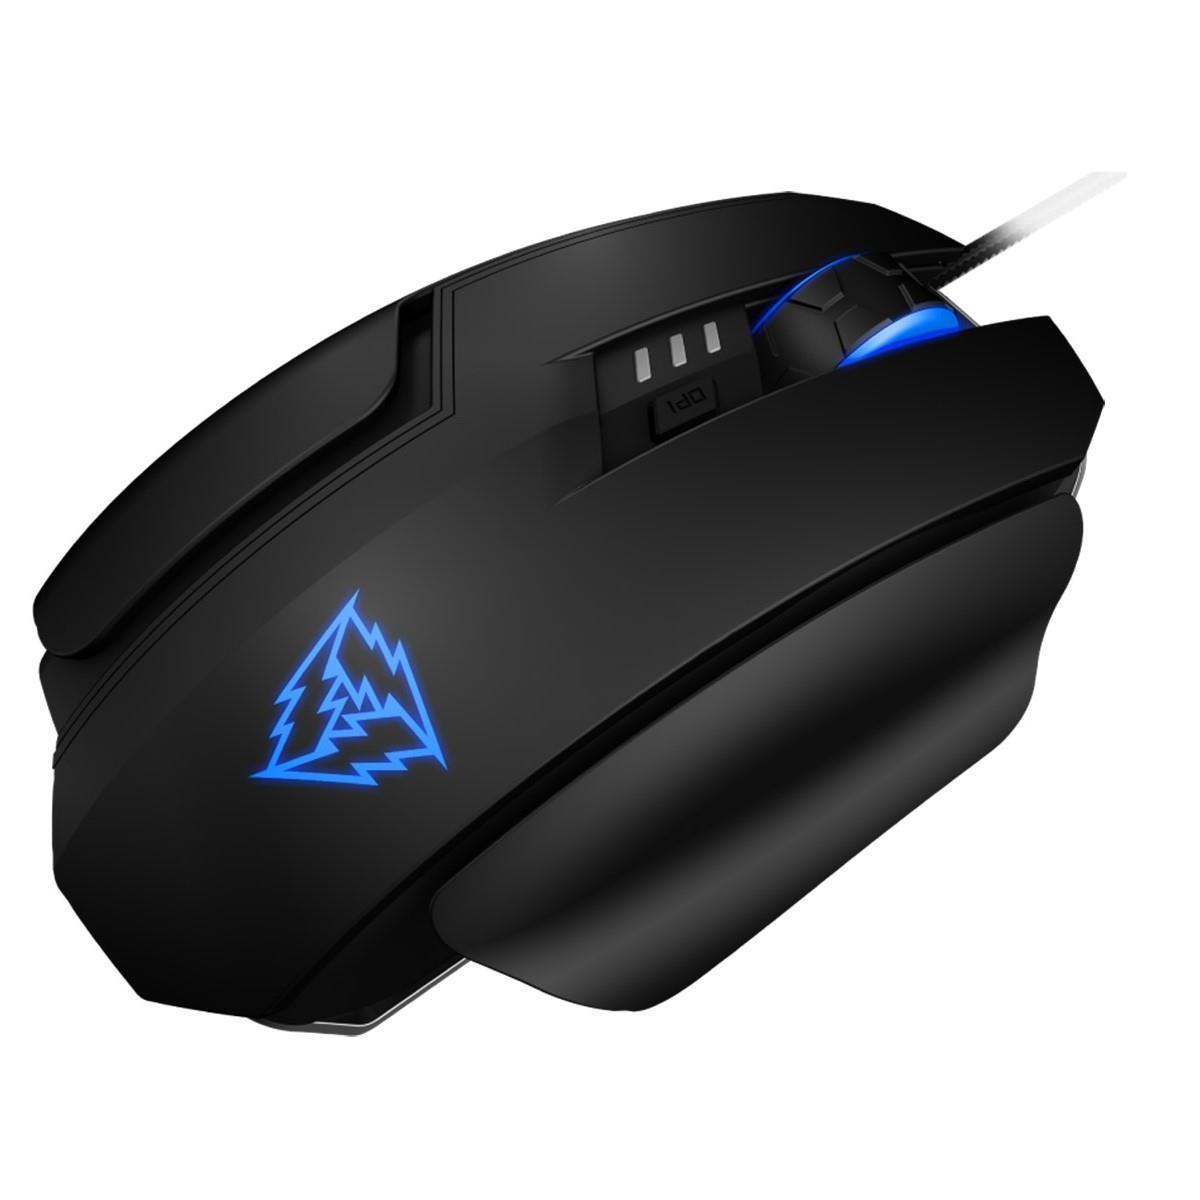 [NEW] Thunder X3 by Aerocool TM50 Gaming Mouse Memory & Programable via Software TM50